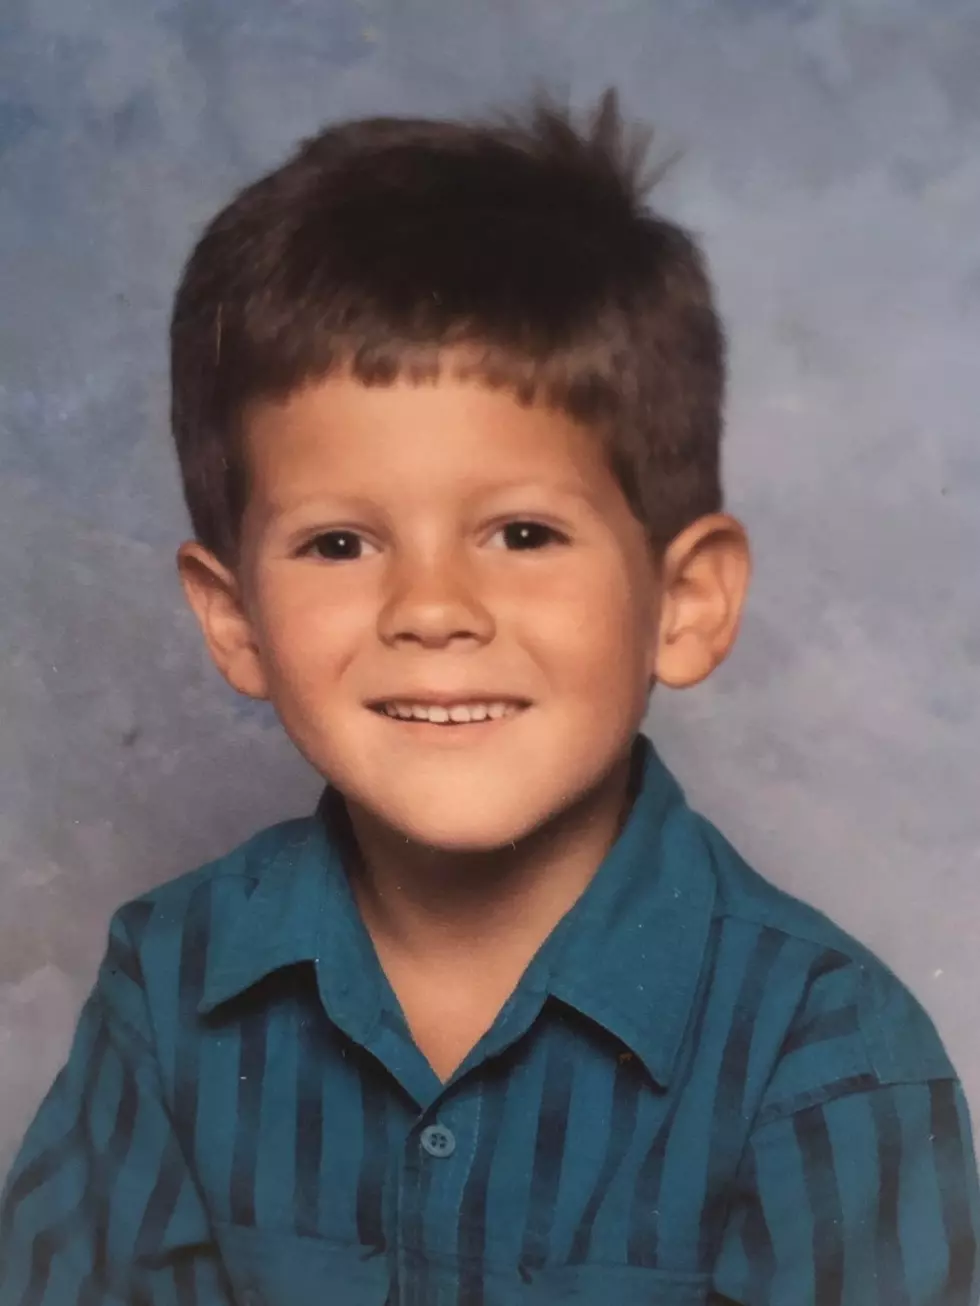 Show Us Your School Photo on National School Picture Day